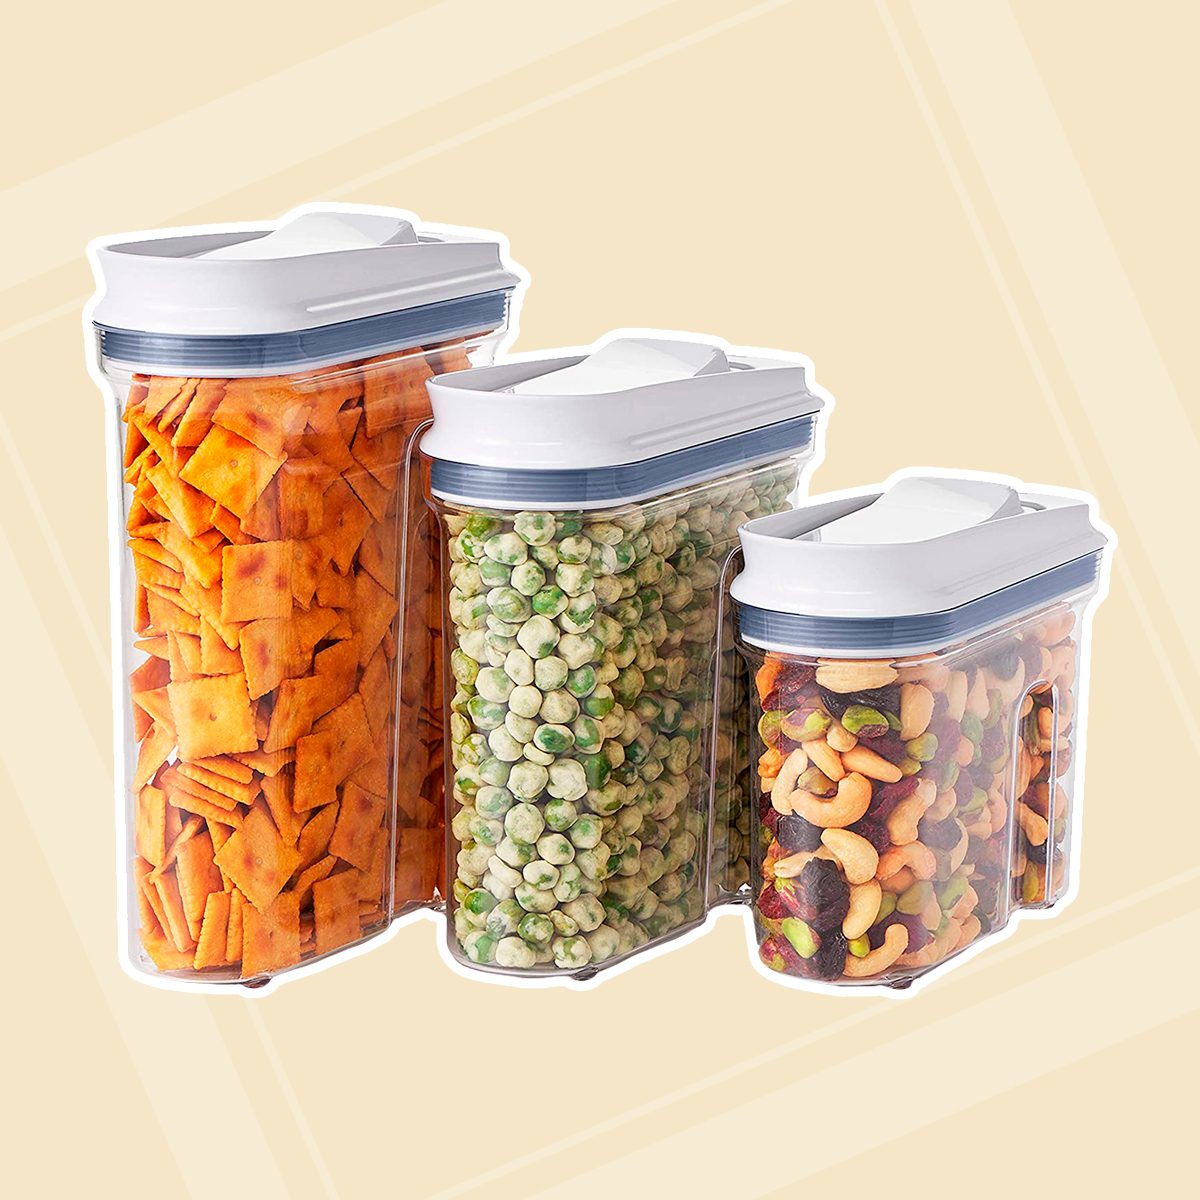 Baking Containers to Keep Your Goods Fresh [Including a Flour Container]